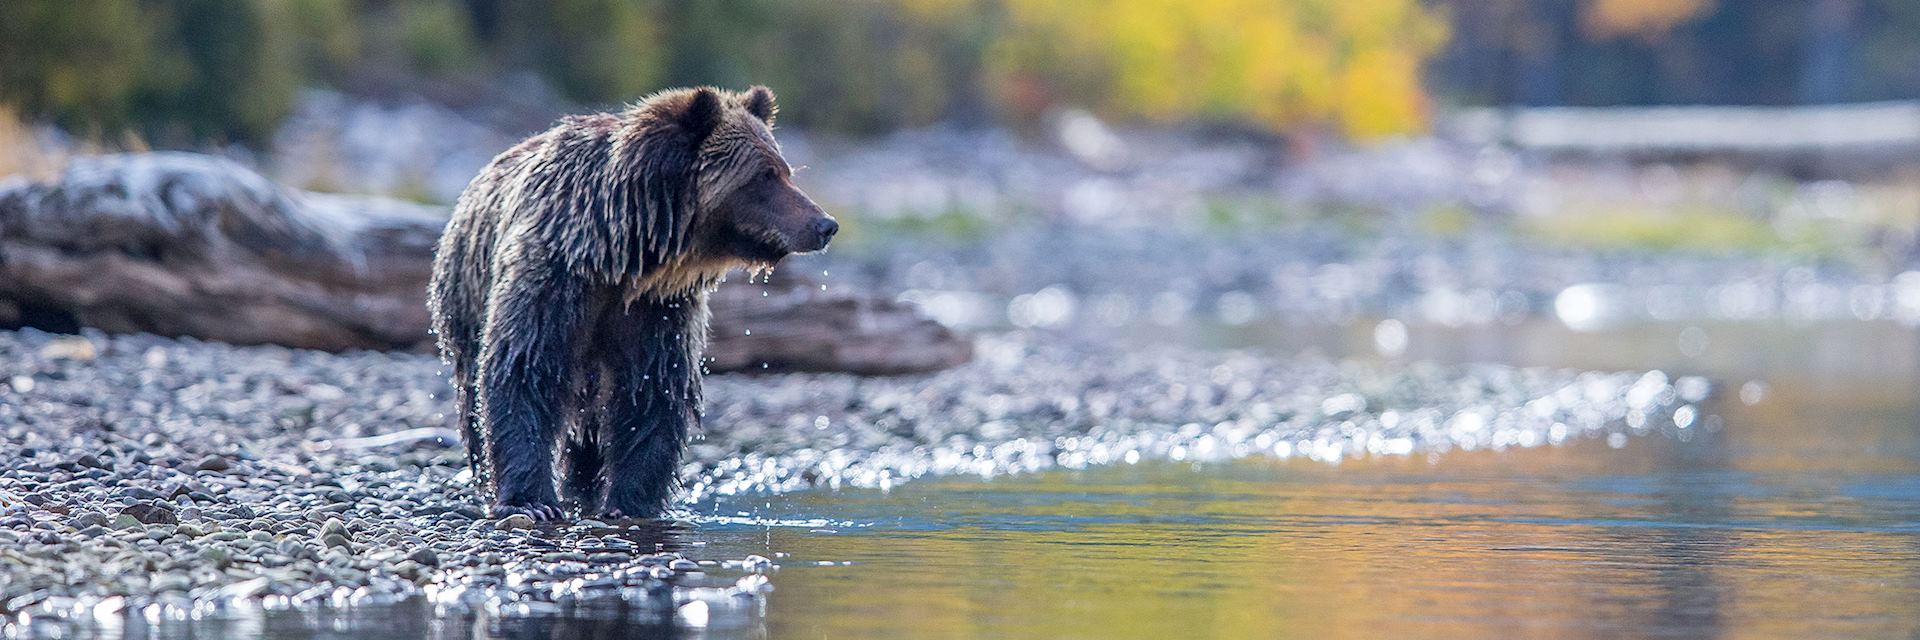 Grizzly bear, Canada